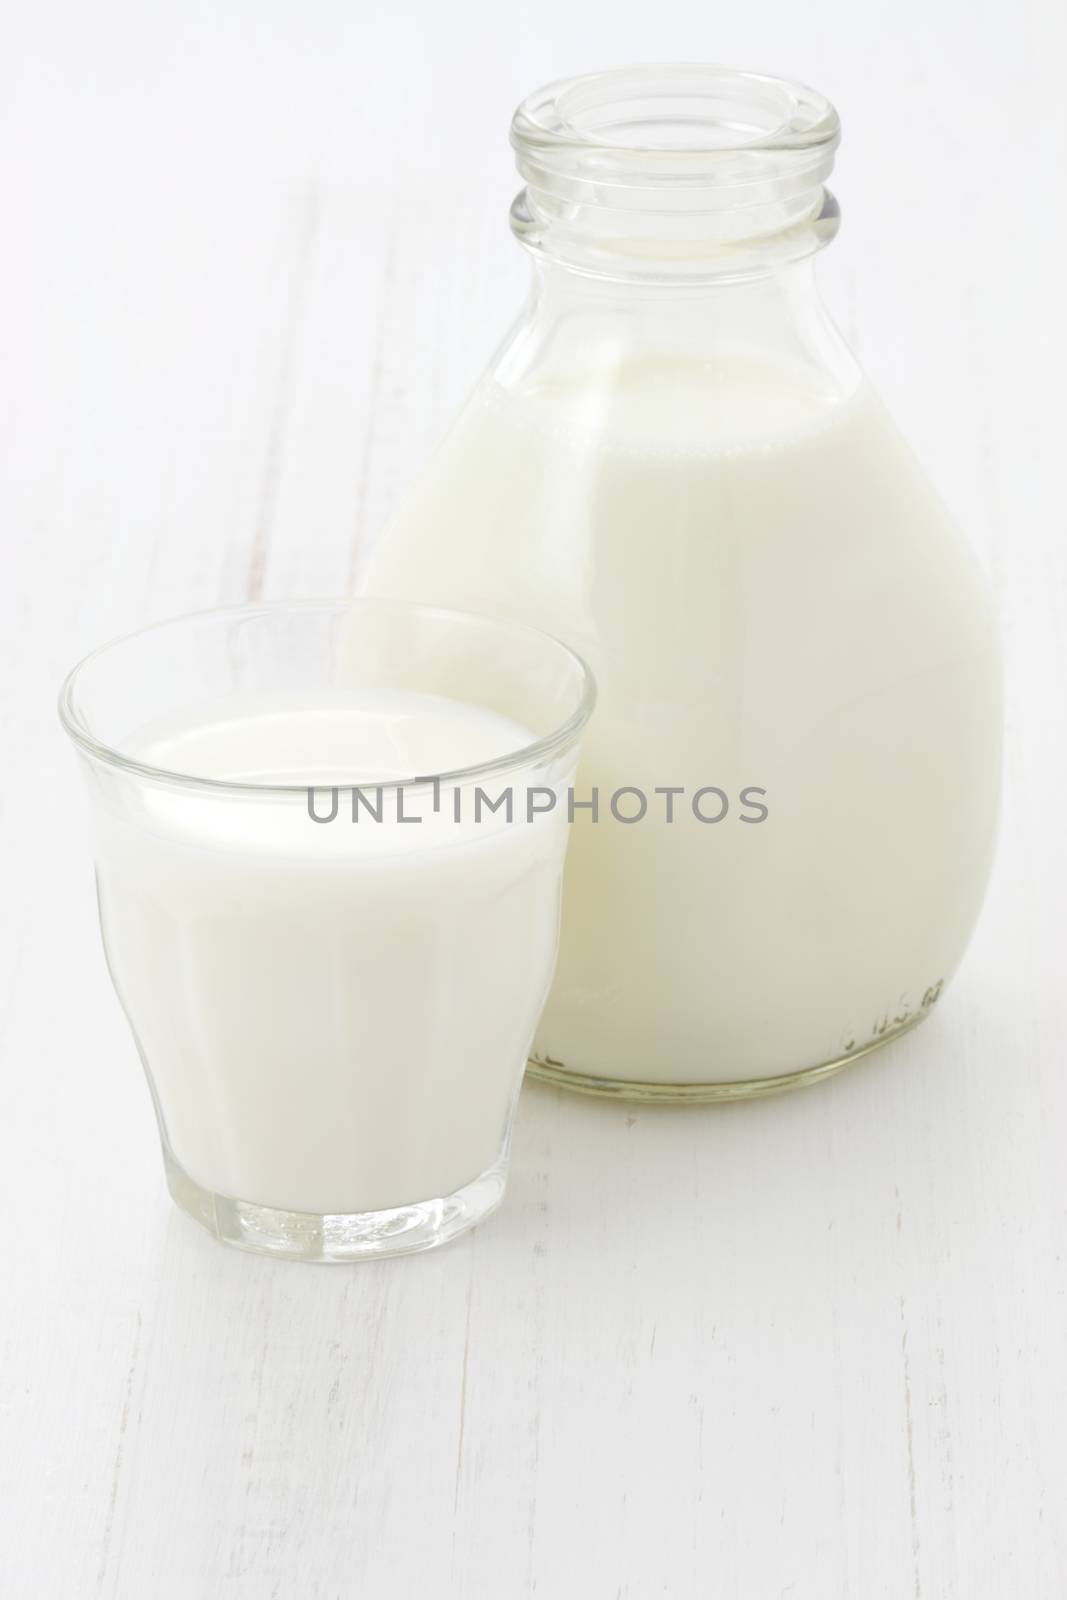 Delicious, nutritious and fresh milk pint.